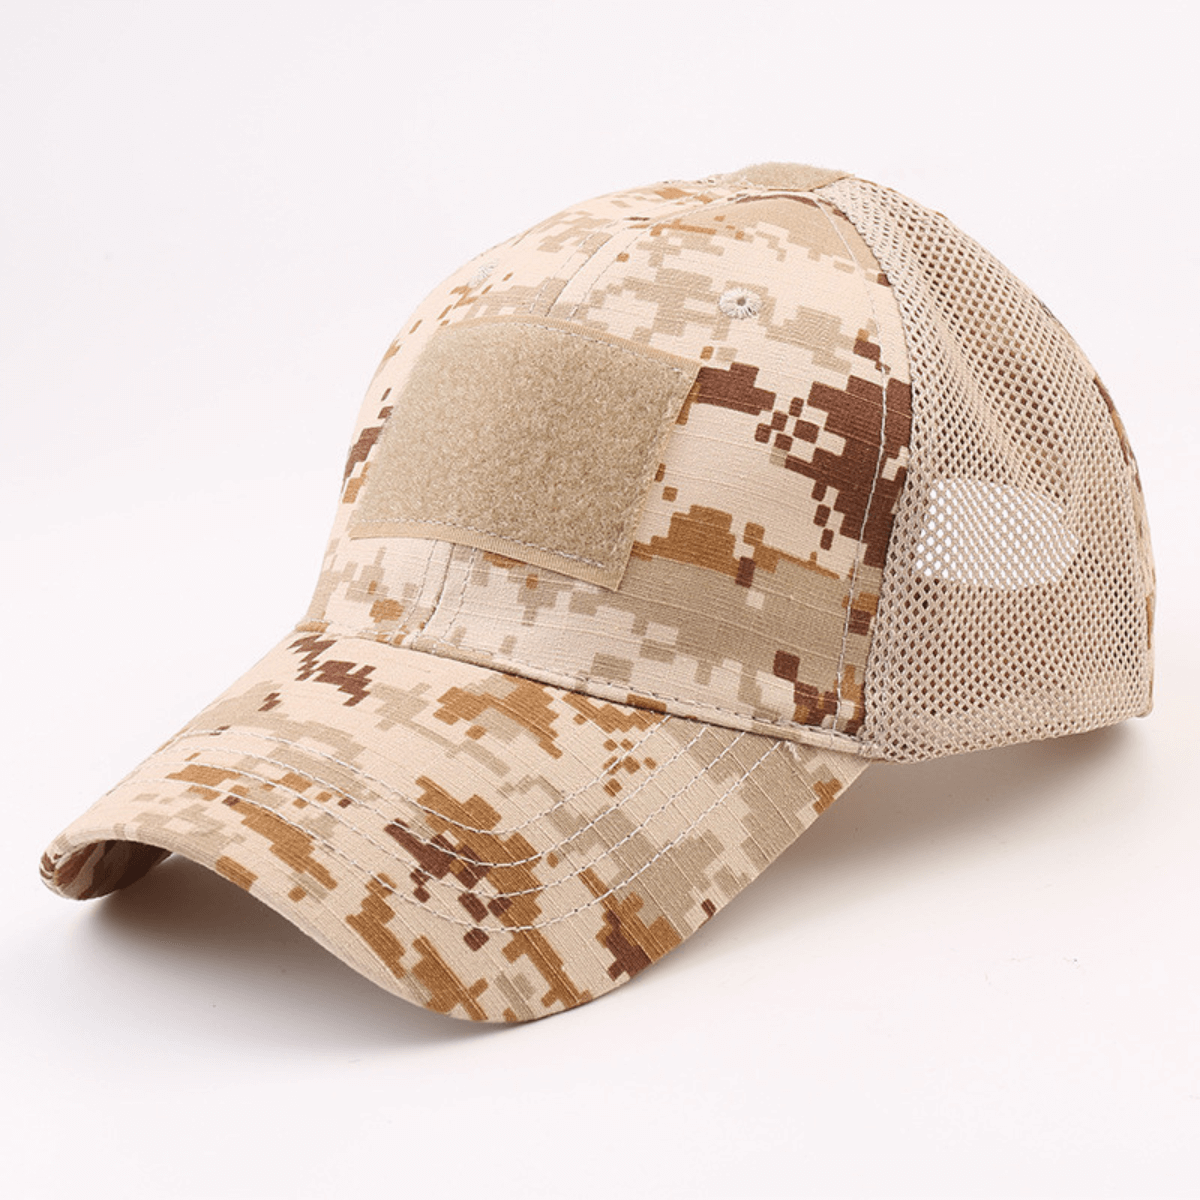 Hat Tactical Military-Style – Strap Adjustable with Patch Urbanheer